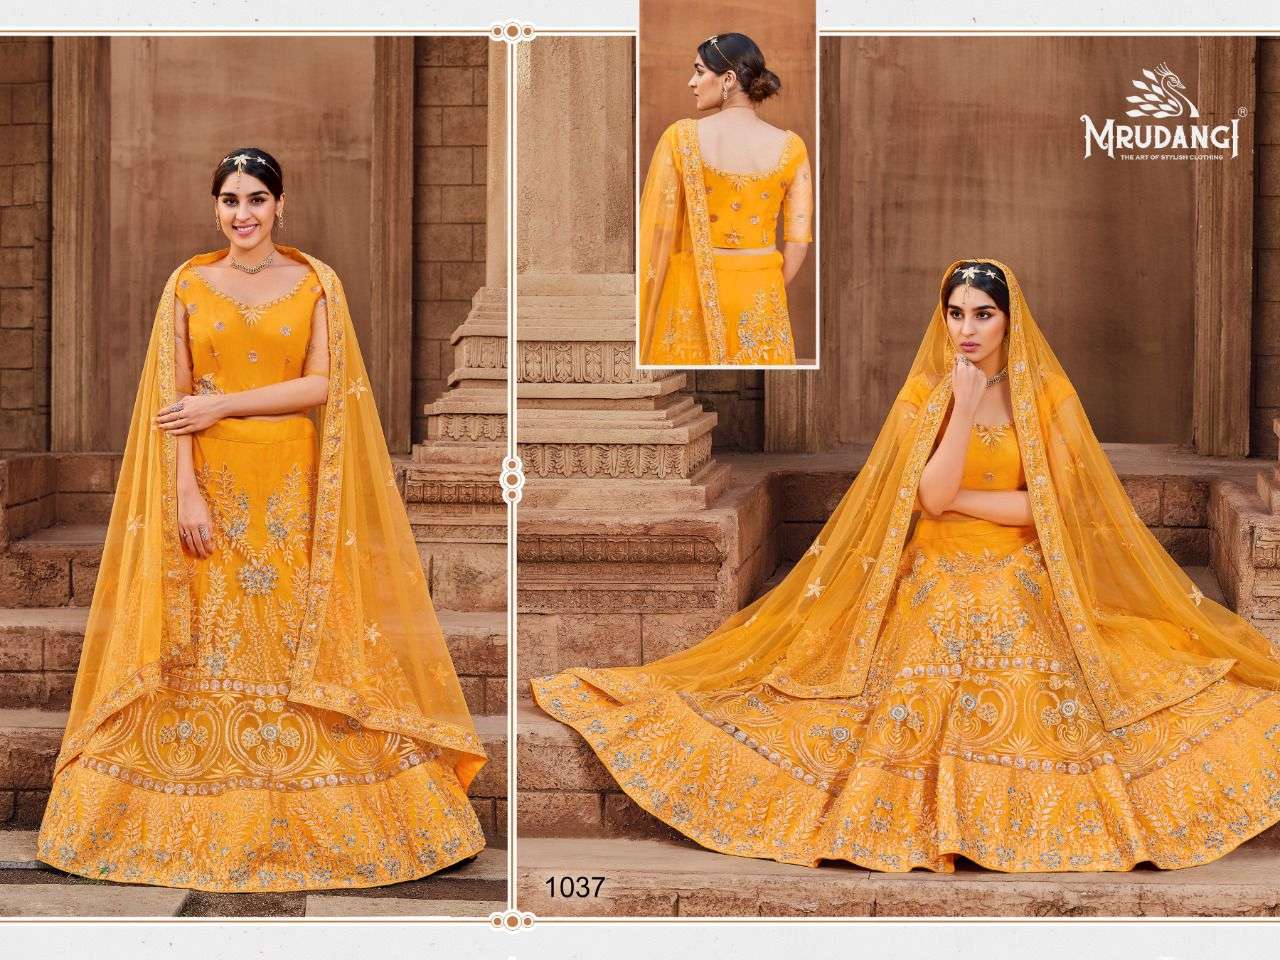 Riyasat By Mrudangi 1035 To 1037 Series Designer Beautiful Wedding Bridal Collection Occasional Wear & Party Wear Soft Net Lehengas At Wholesale Price